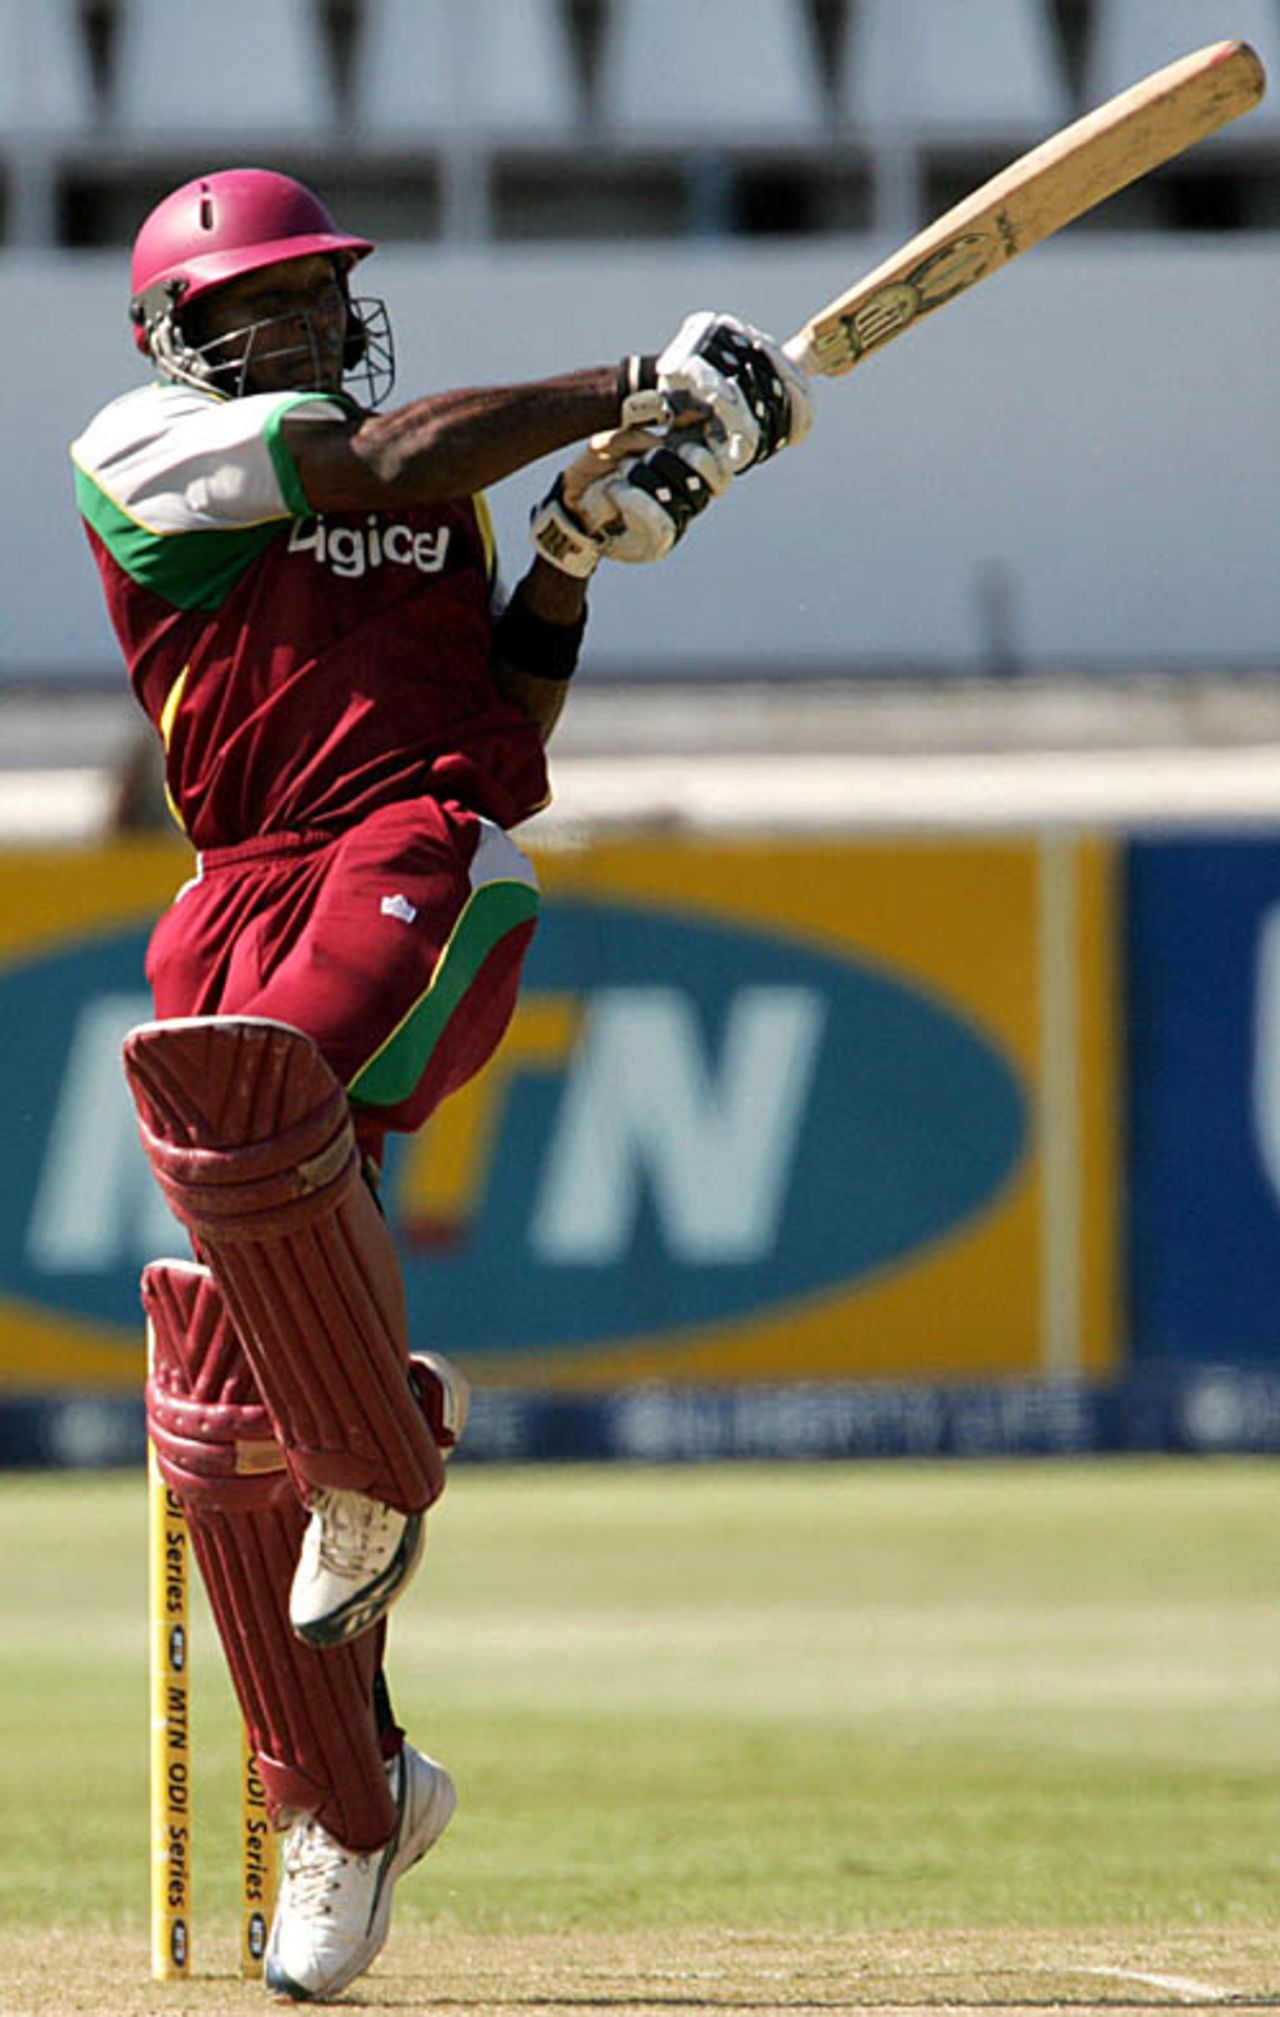 Brenton Parchment plays the pull off Shaun Pollock, South Africa v West Indies, 4th ODI, Durban, February 1, 2008